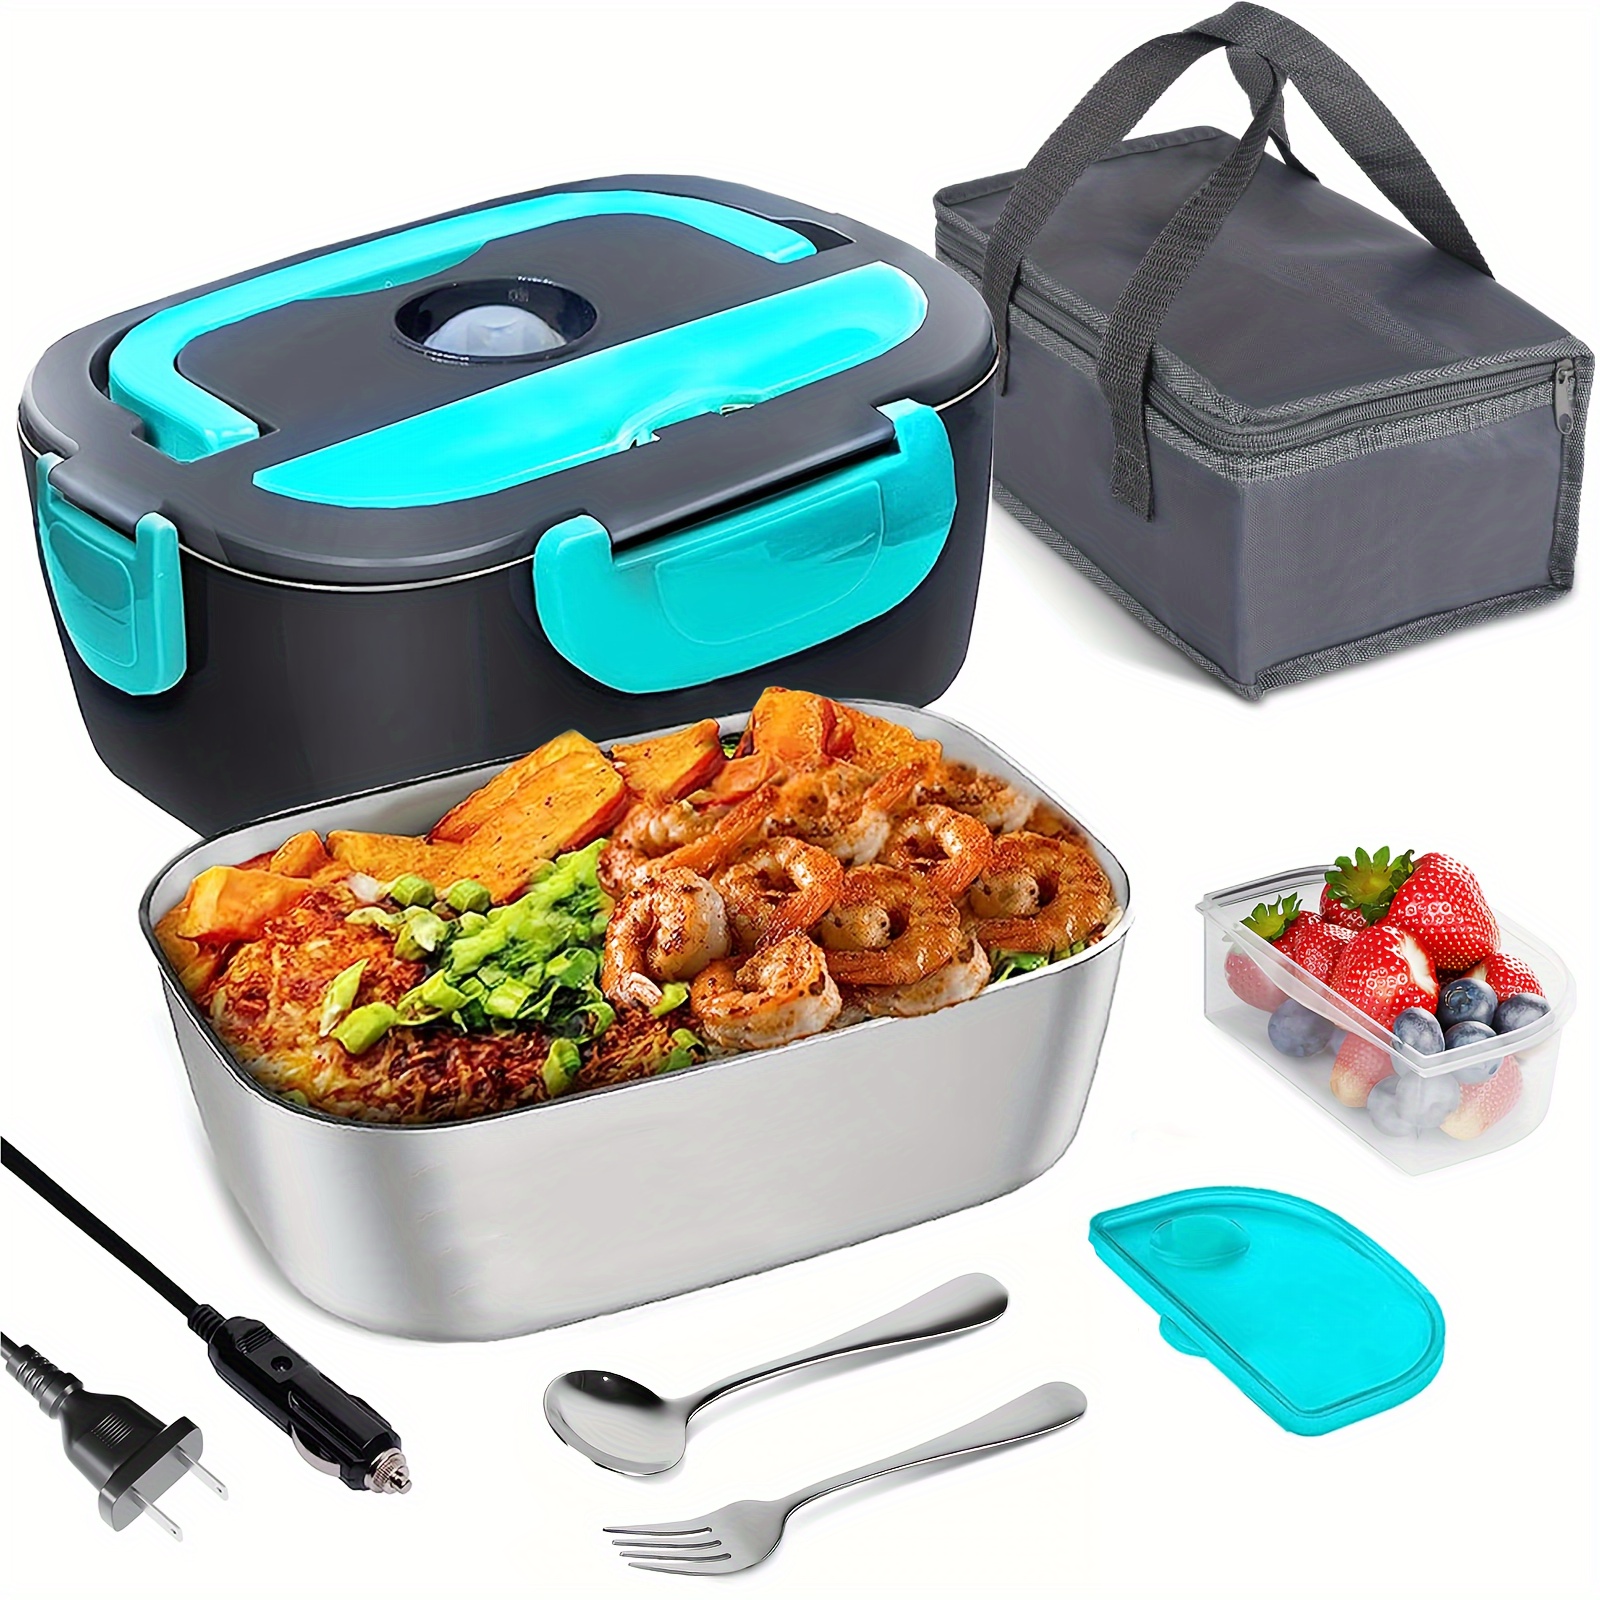 

Electric Lunch Box Food Heater, 3 In 1 Heated Lunch Boxes For Adults, 12v/24v/110v Portable Food Warmer For Car/truck/office With Fork Spoon And Insulated Carry Bag